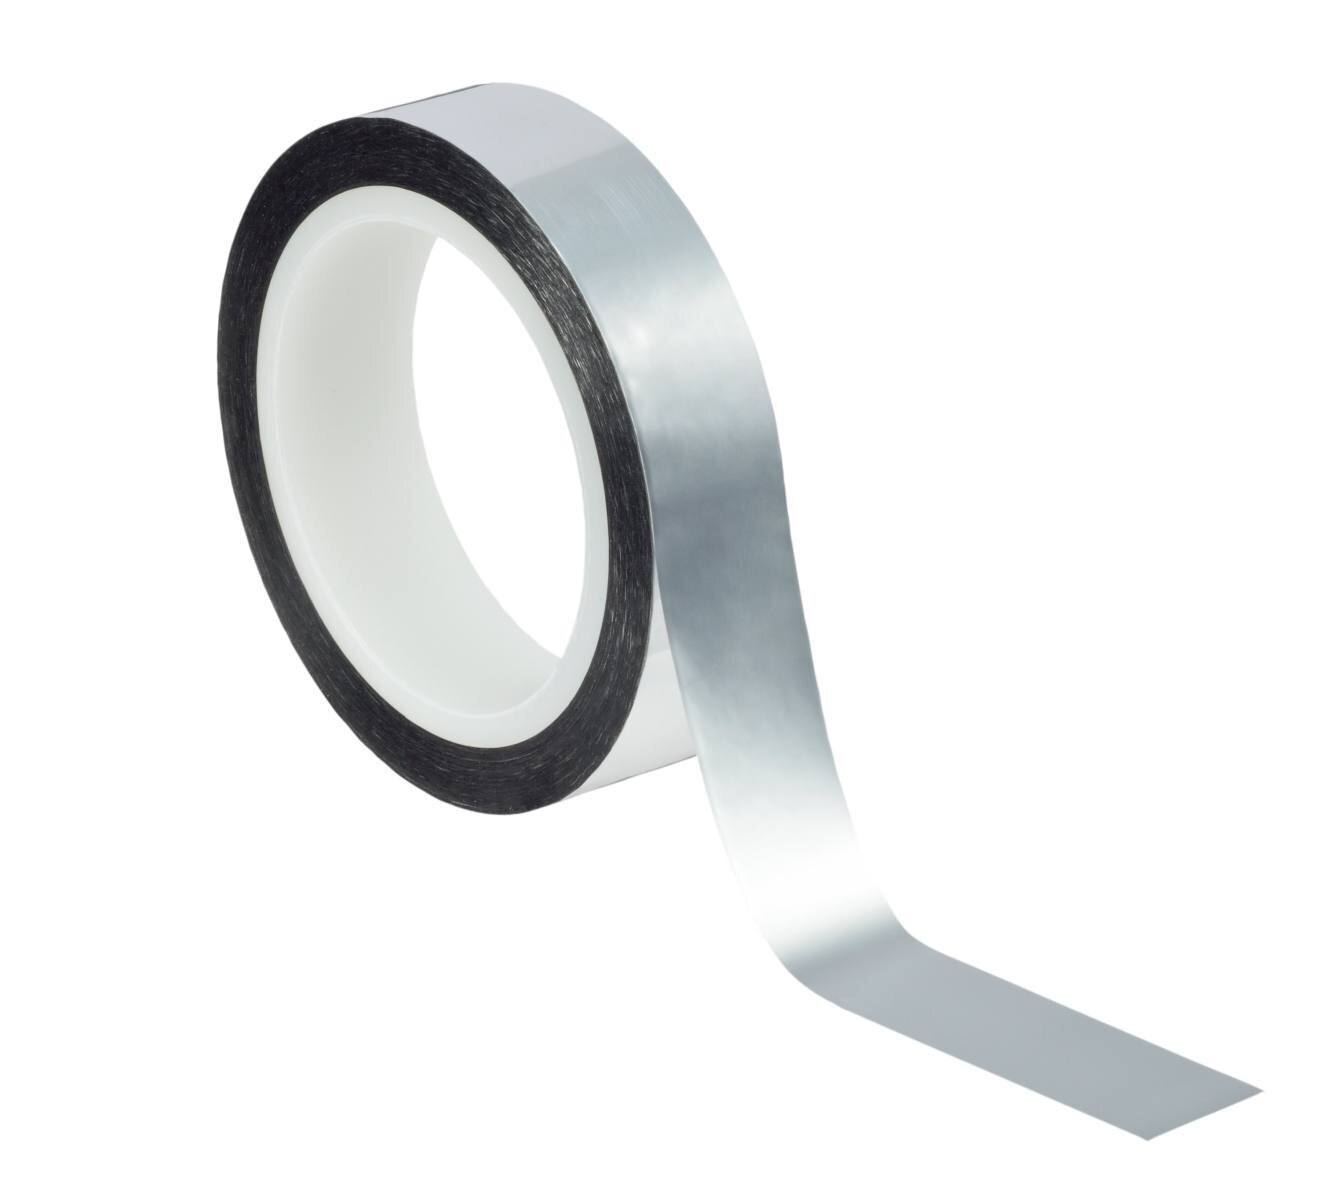 3M polyester adhesive tape 850 S, silver, 12 mm x 66 m, 0.05 mm